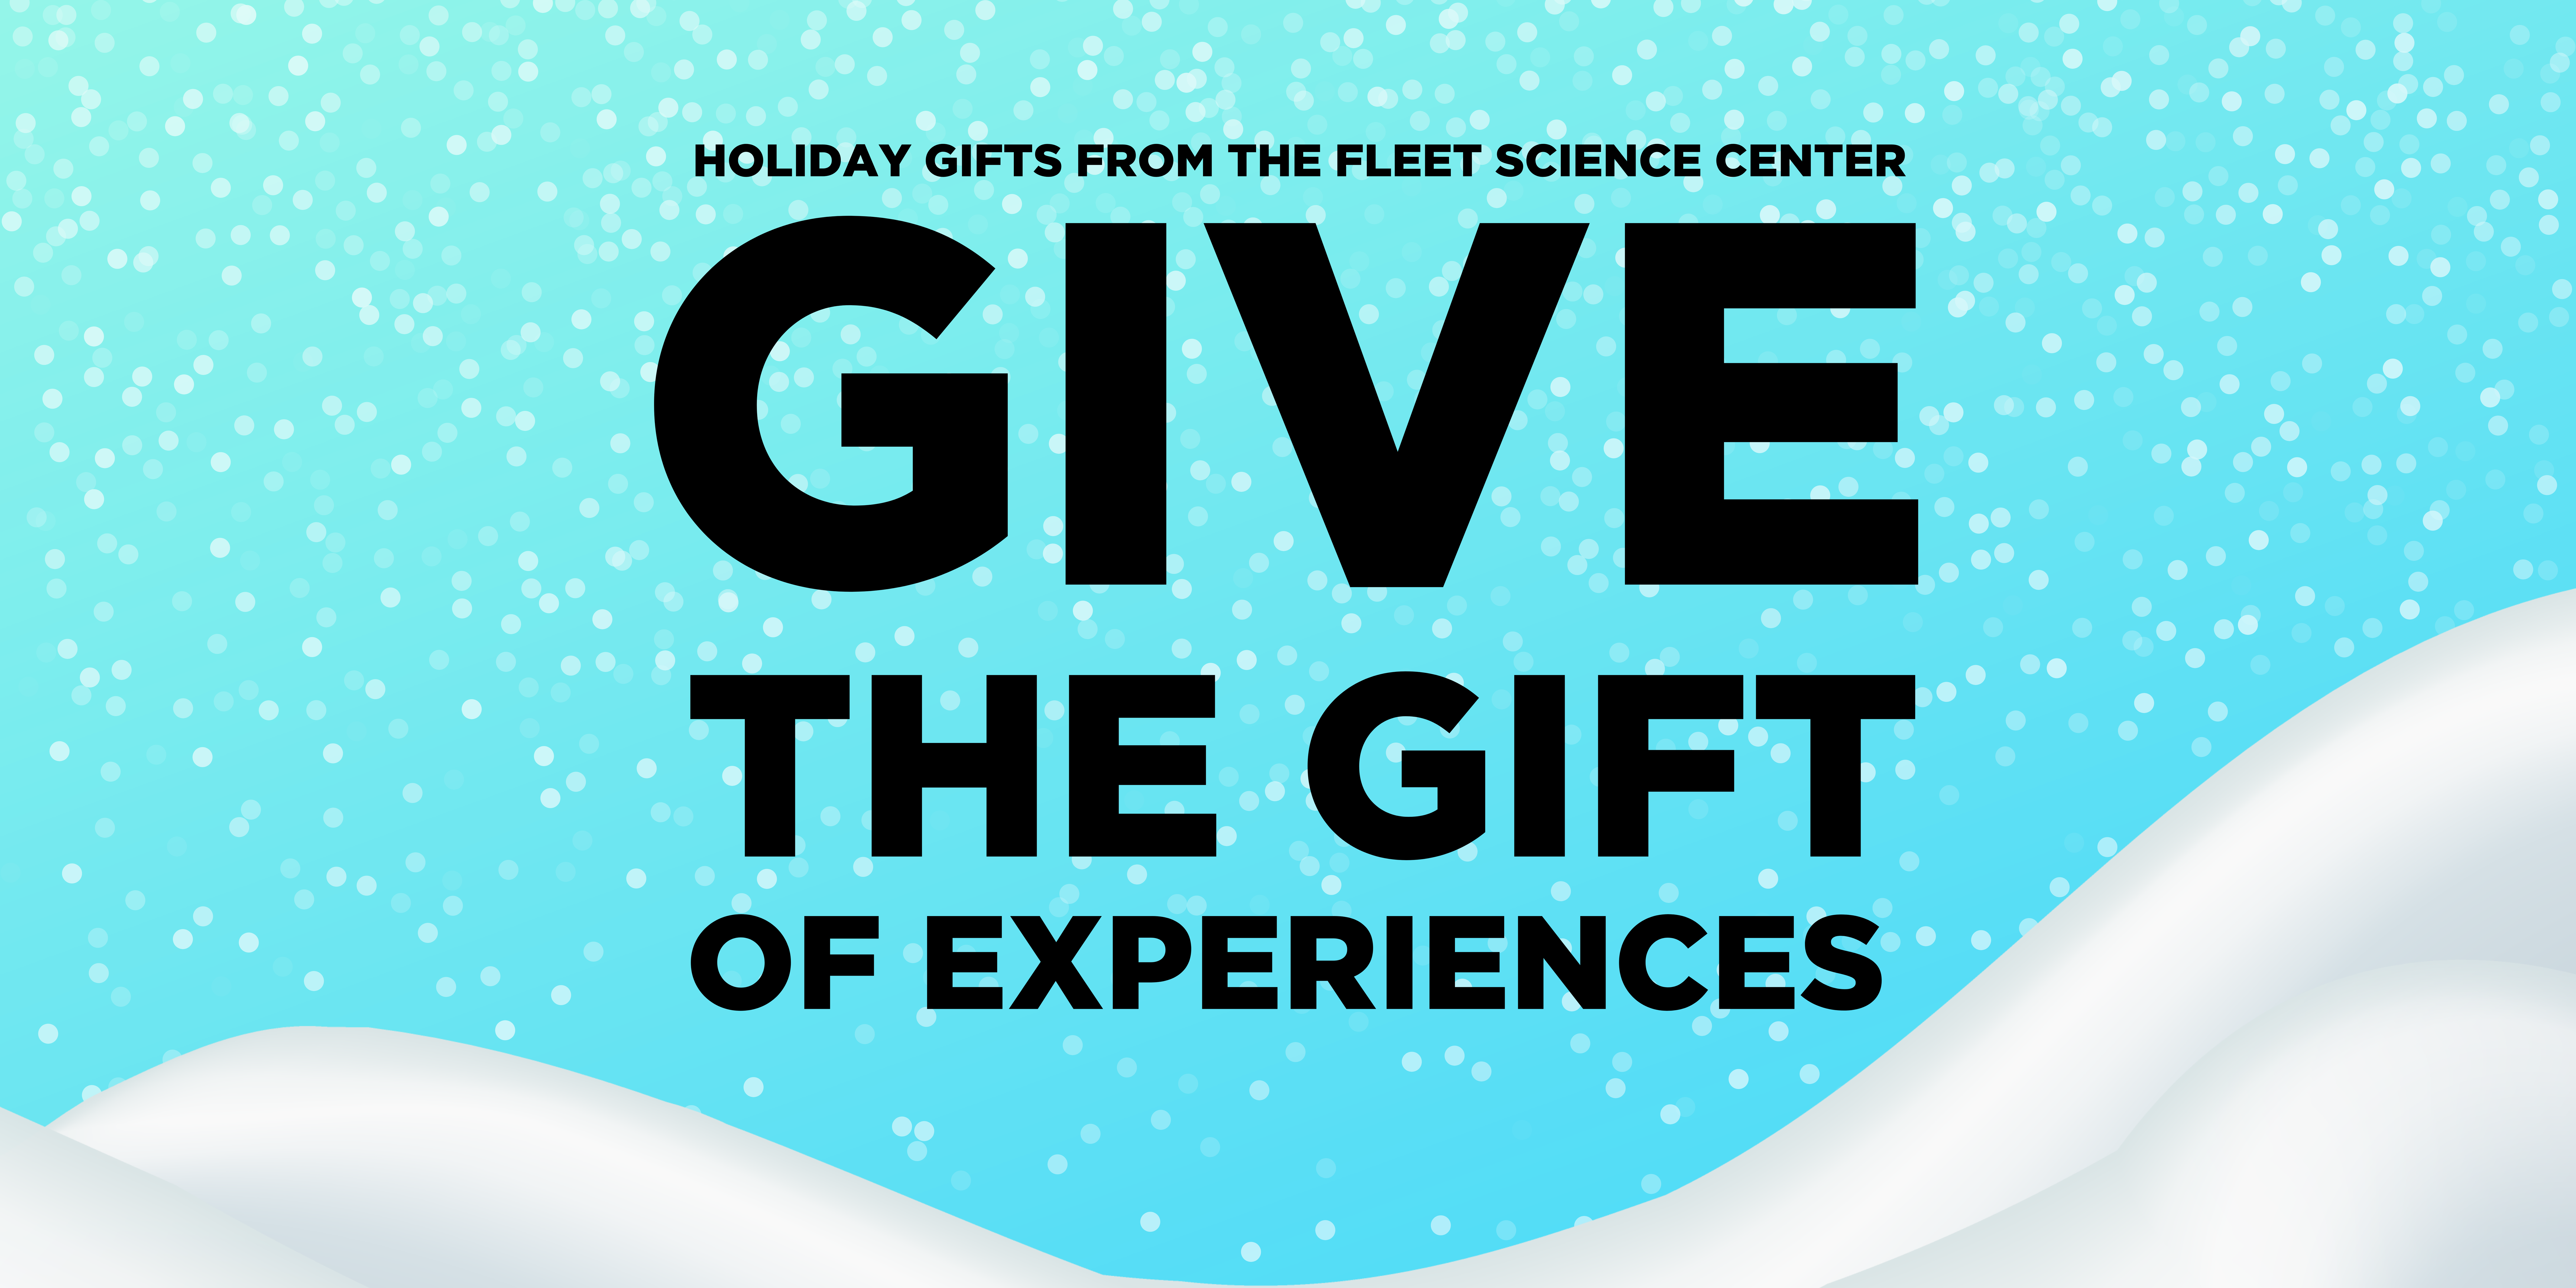 Graphic image with text that says "HOLIDAY GIFTS FROM THE FLEET SCIENCE CENTER.  GIVE THE GIFT OF EXPERIENCES."